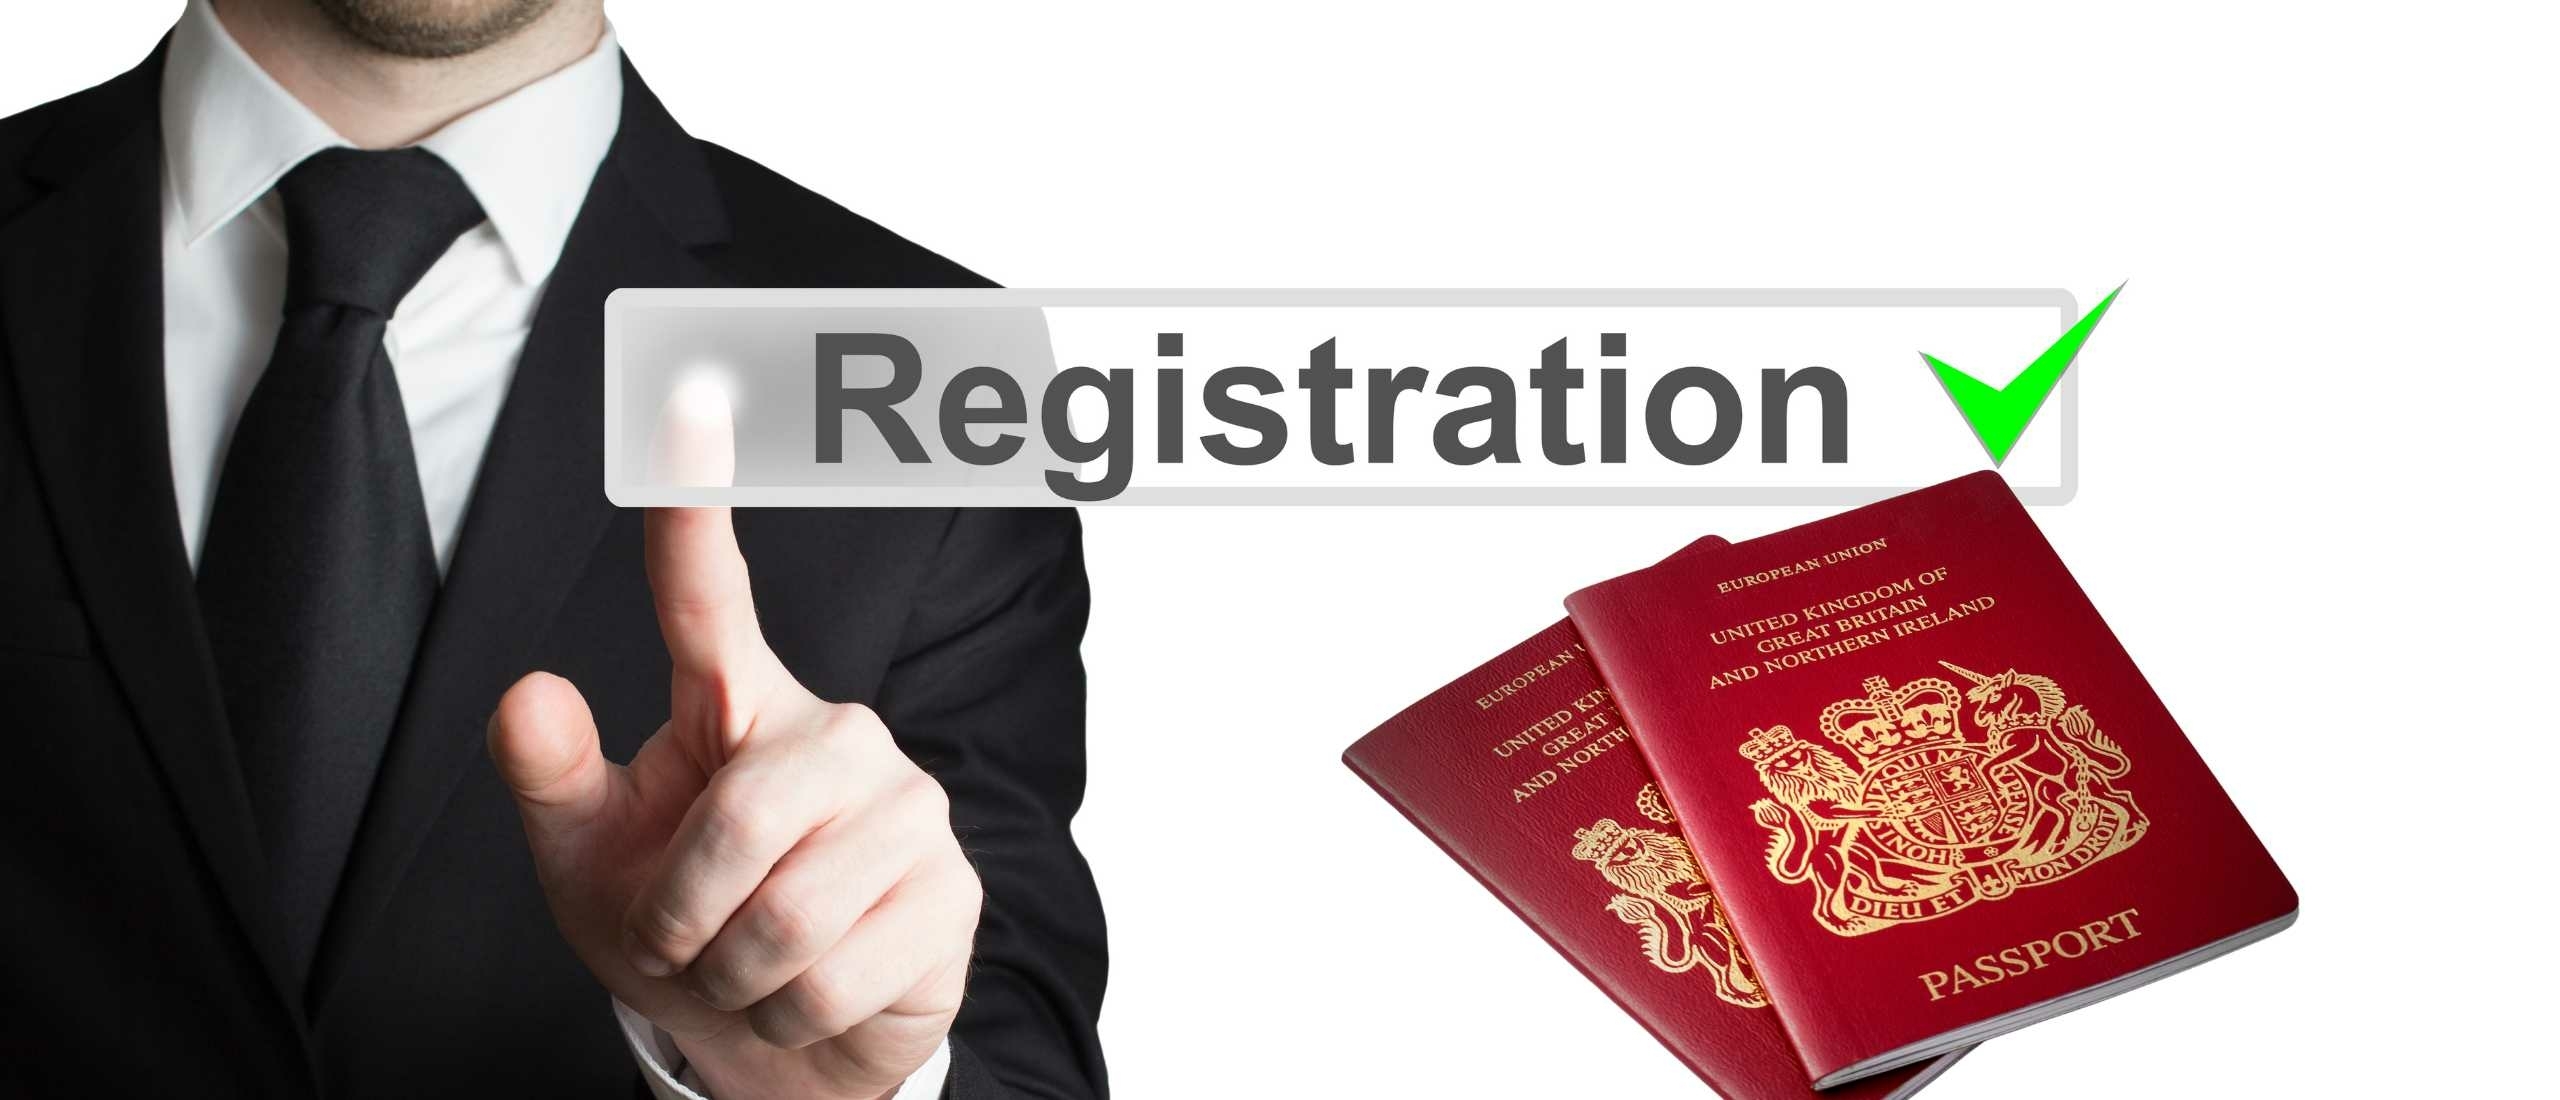 How to Register with the Municipality of Amsterdam: Tips for New Residents